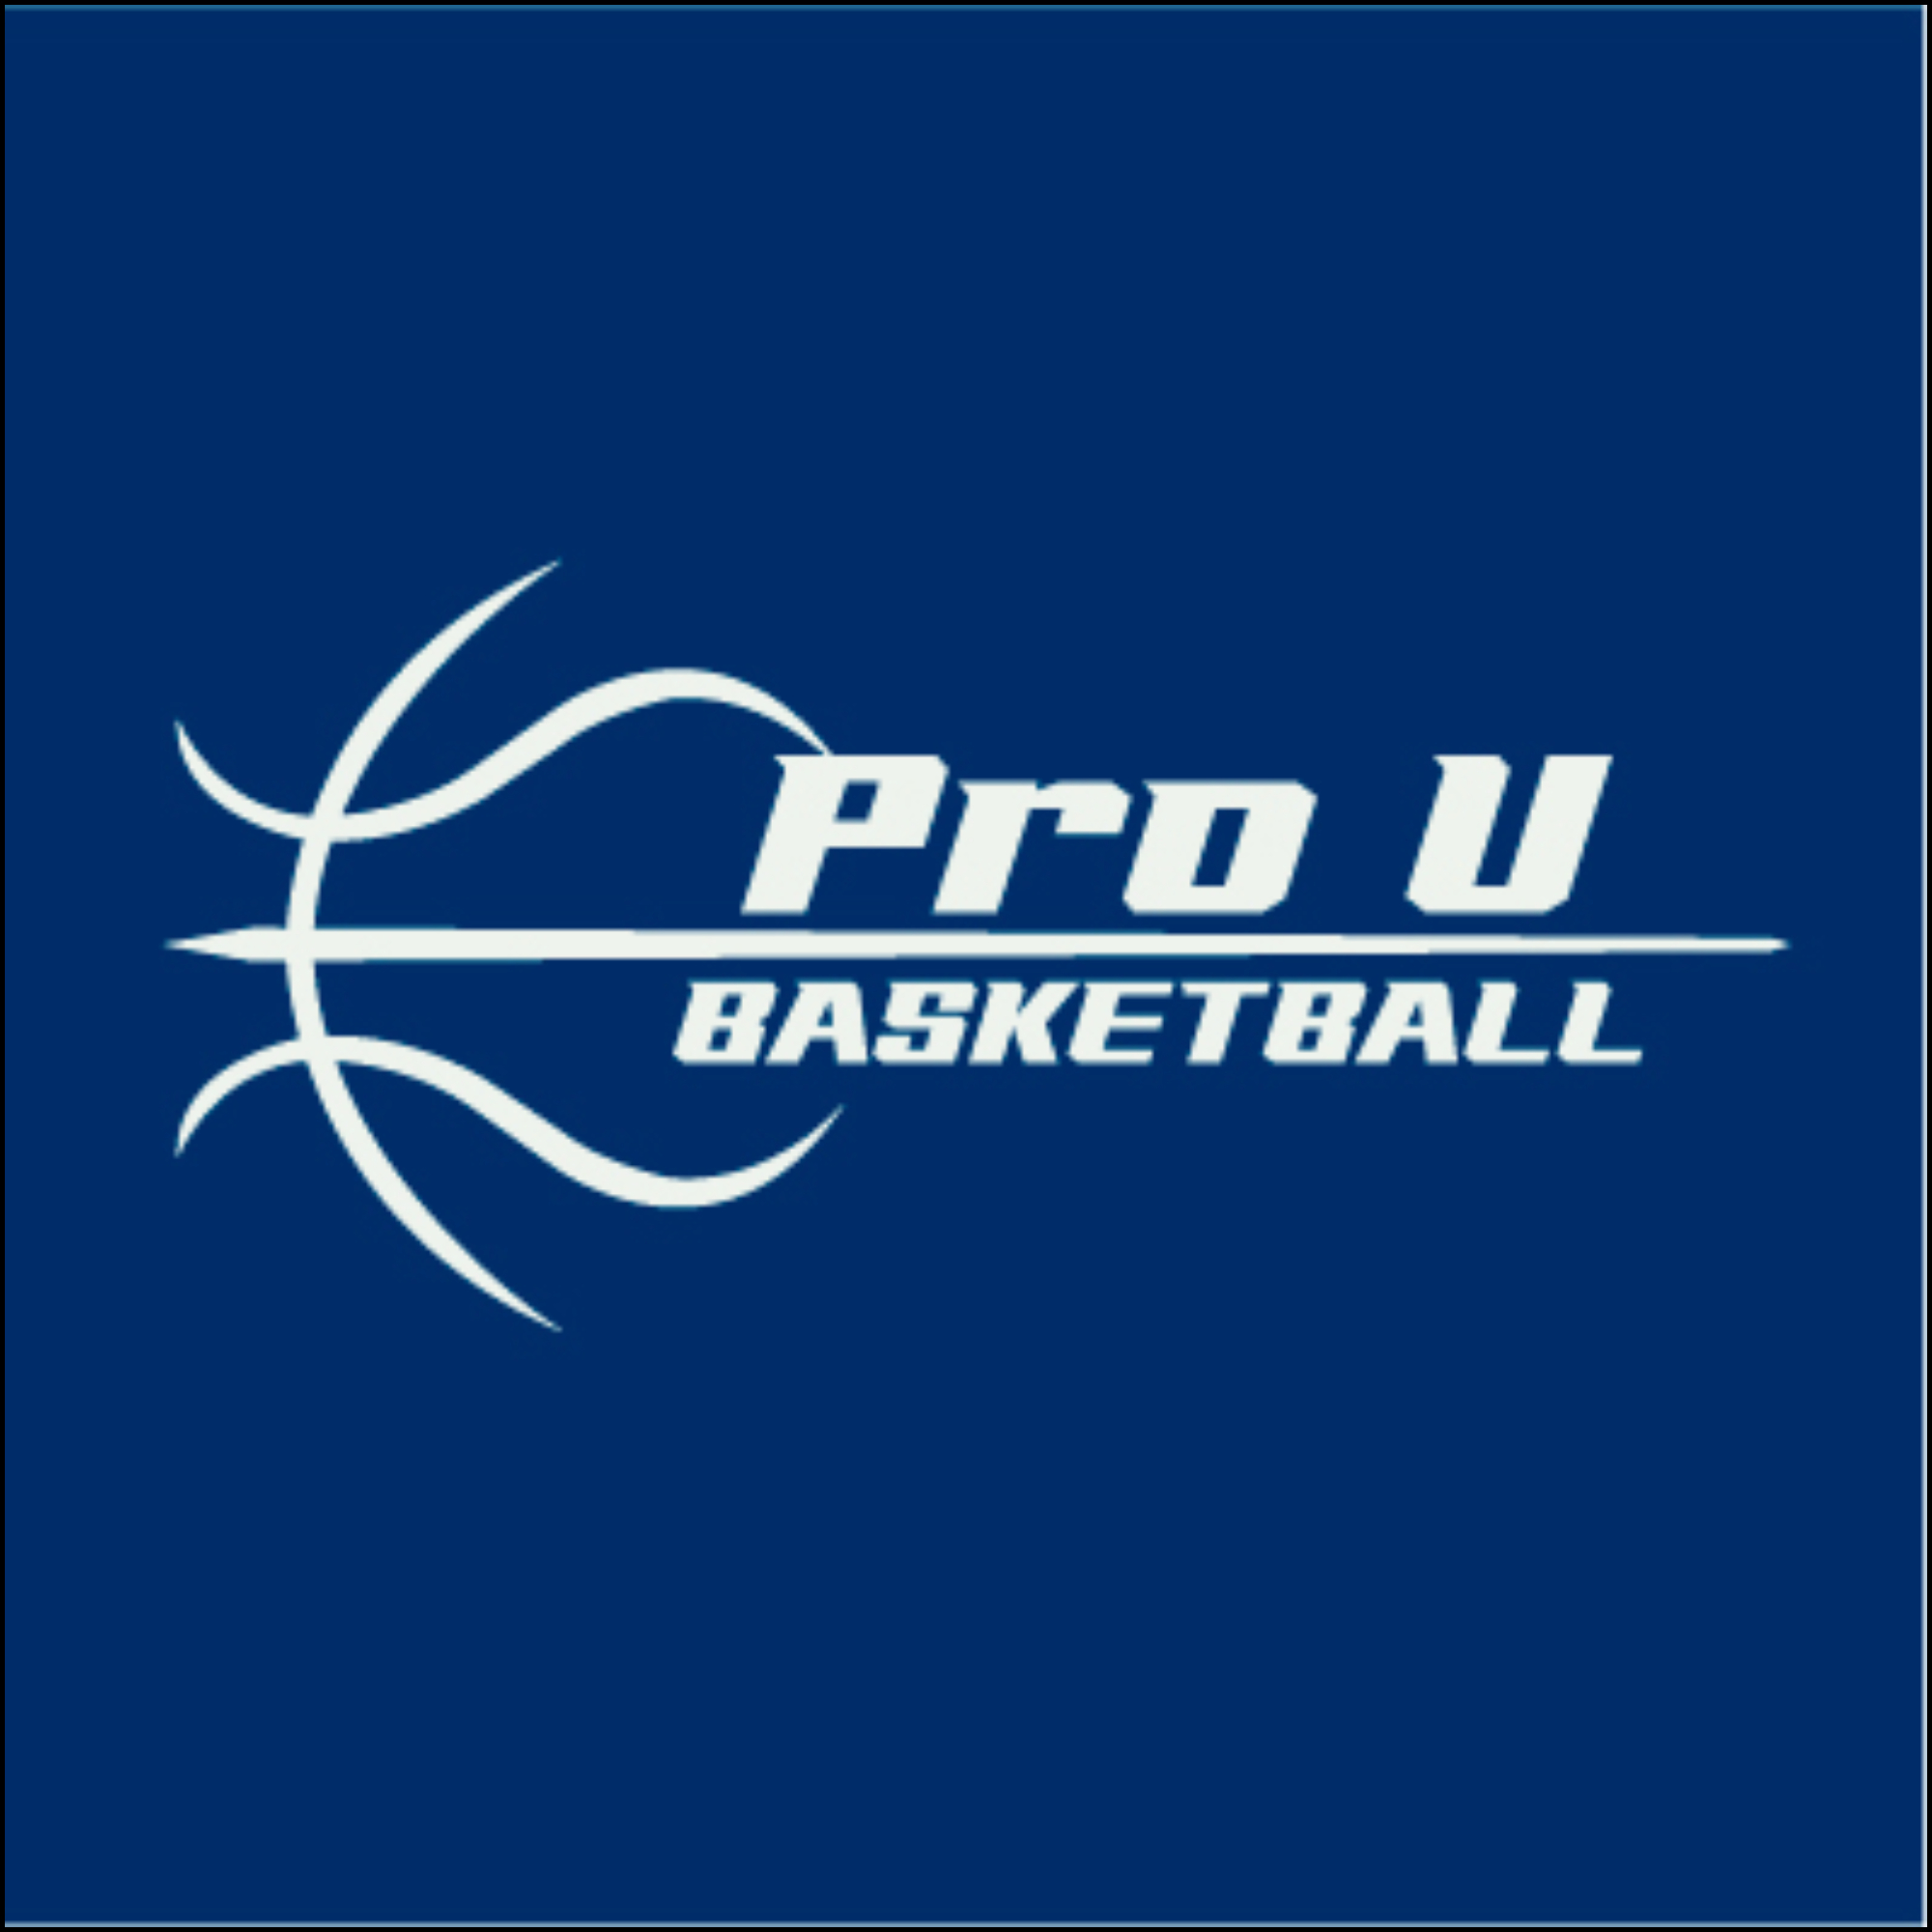 The official logo of Pro University Basketball Club